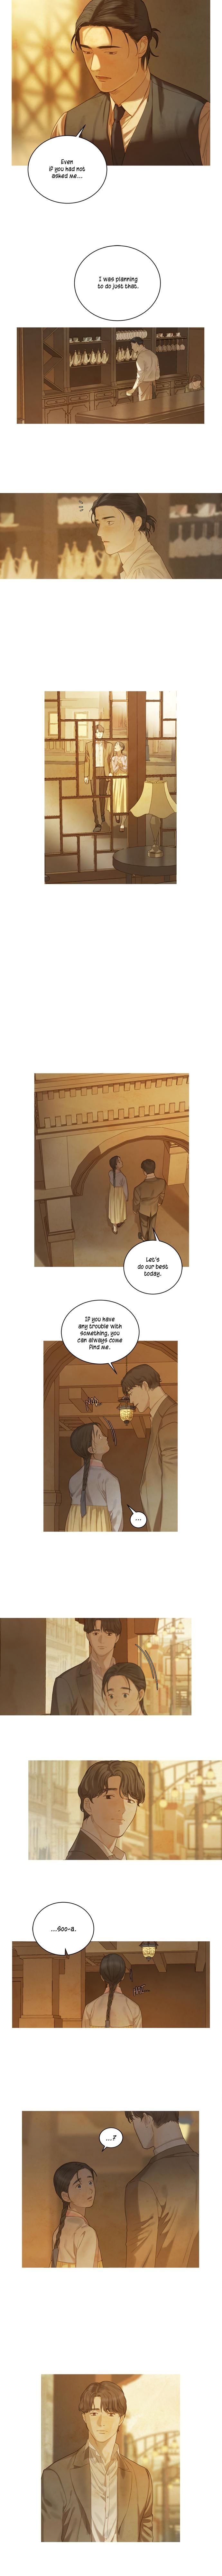 Gorae Byul - The Gyeongseong Mermaid - Chapter 36 Page 10